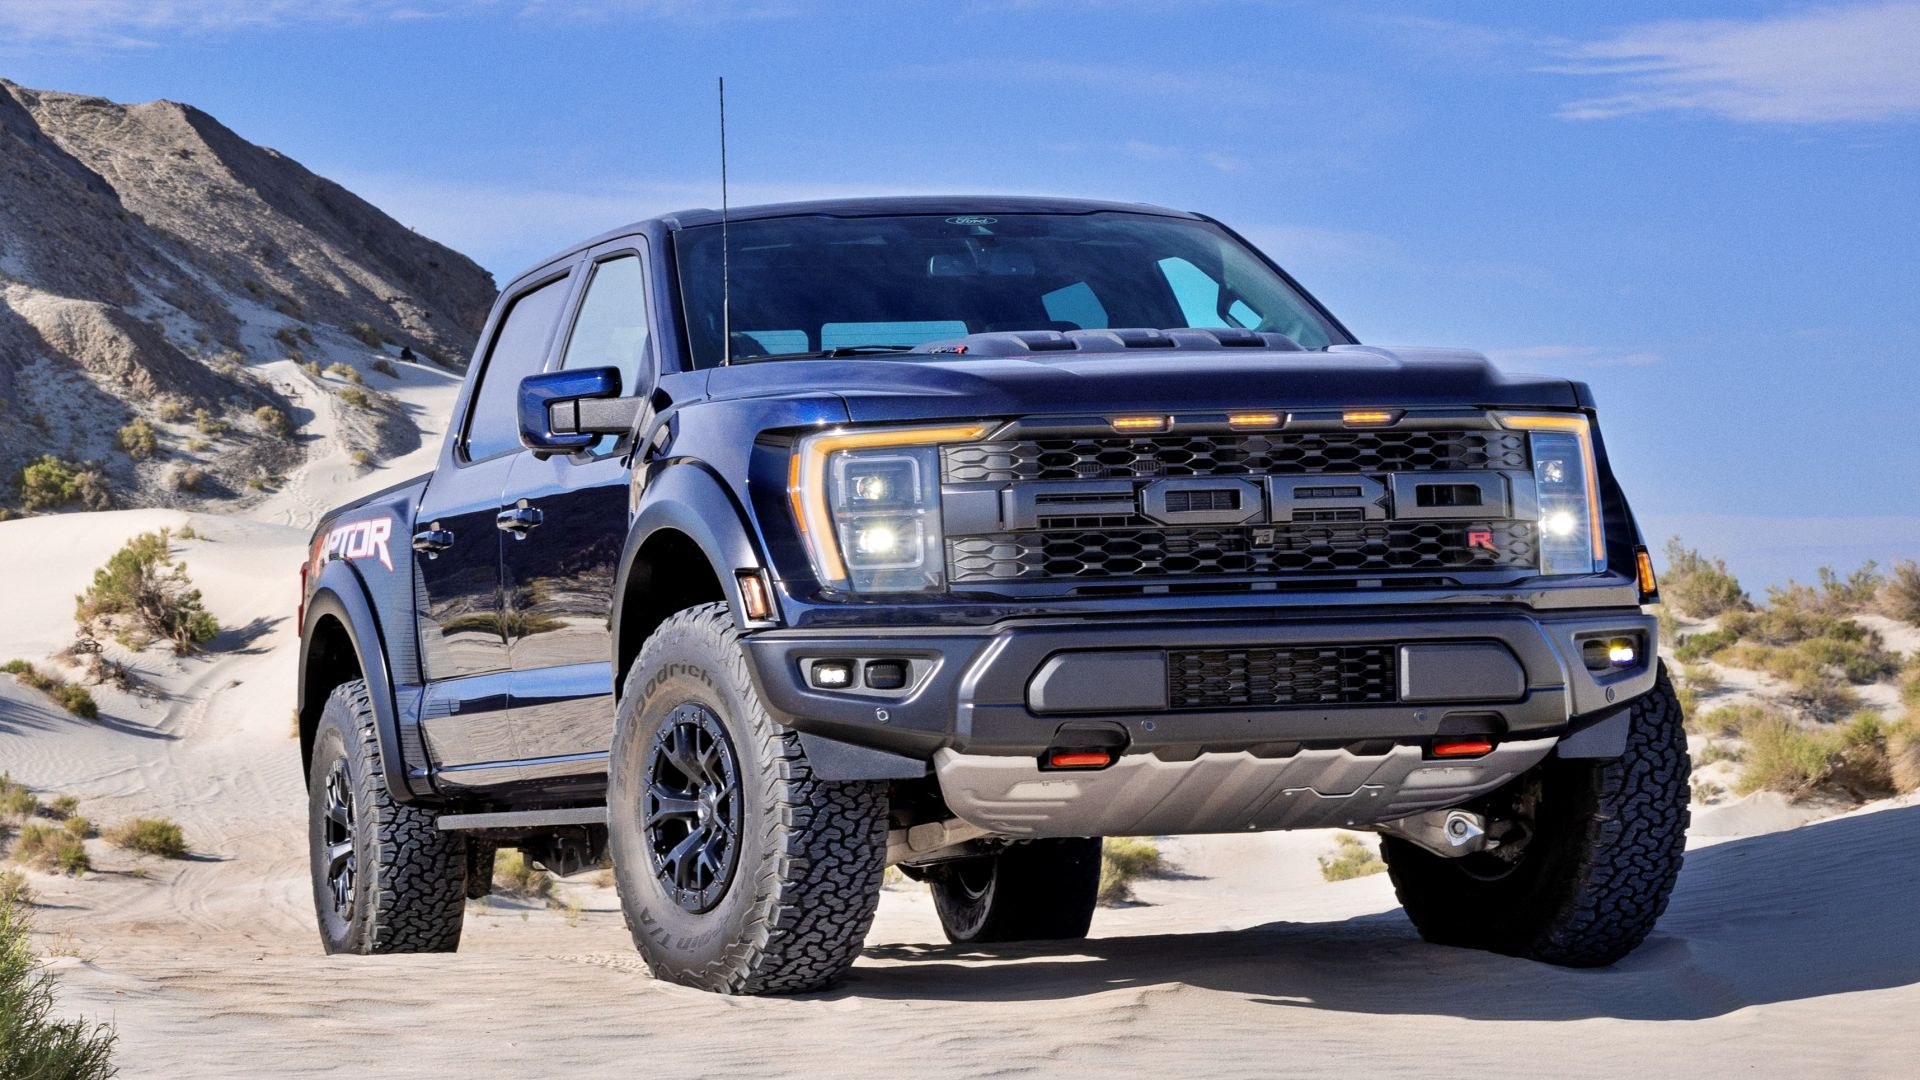 Truck tag line 'Built Ford Tough' turns 35